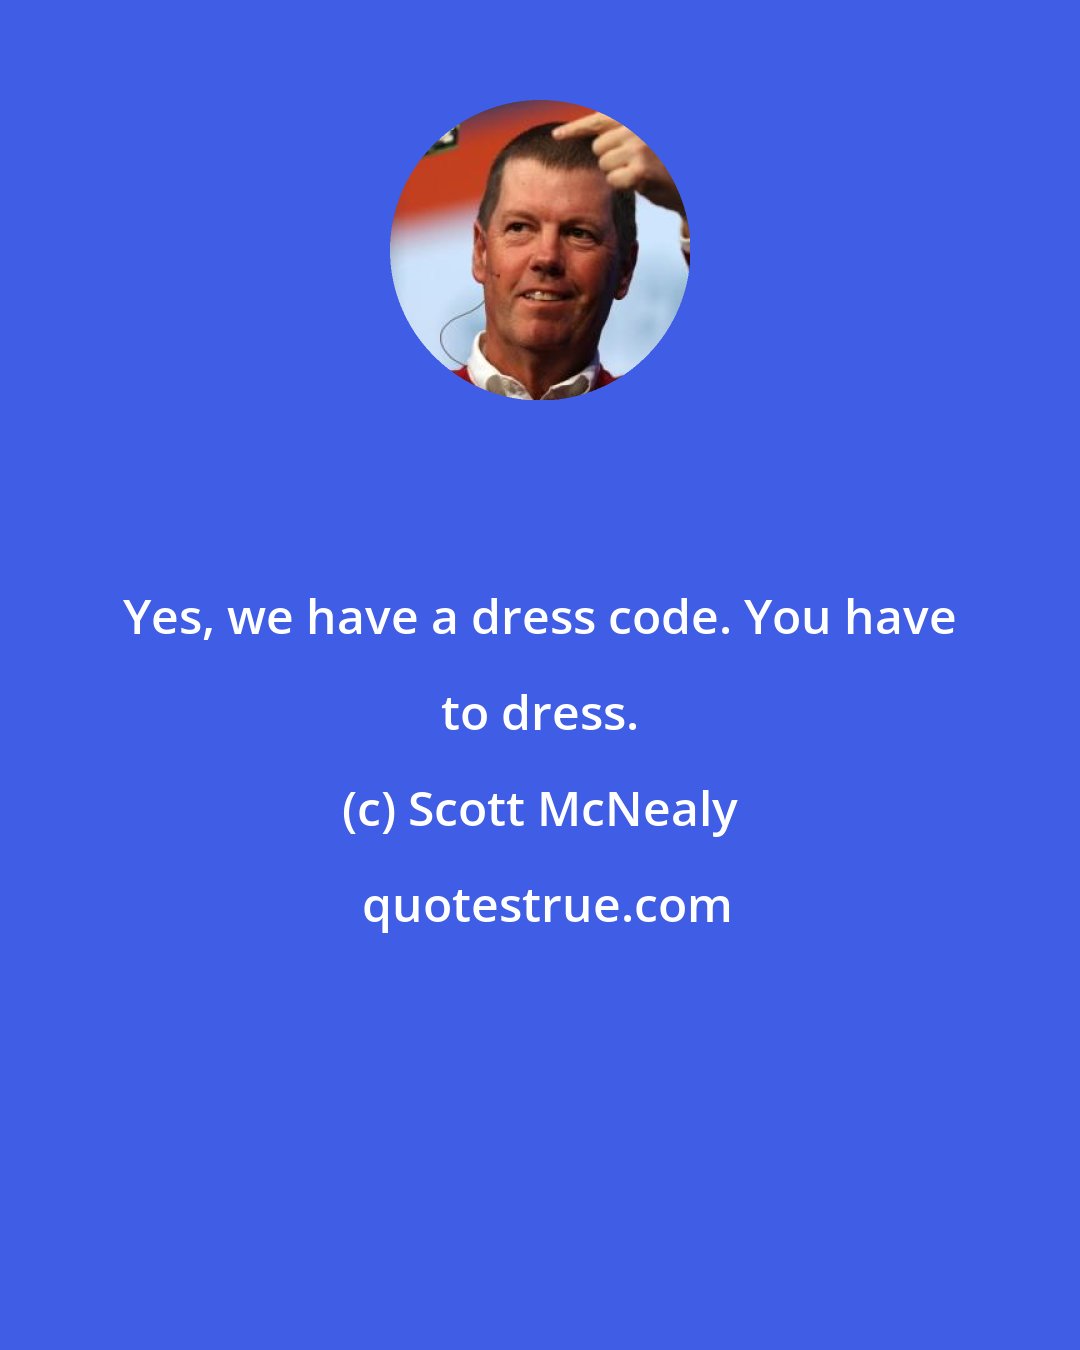 Scott McNealy: Yes, we have a dress code. You have to dress.